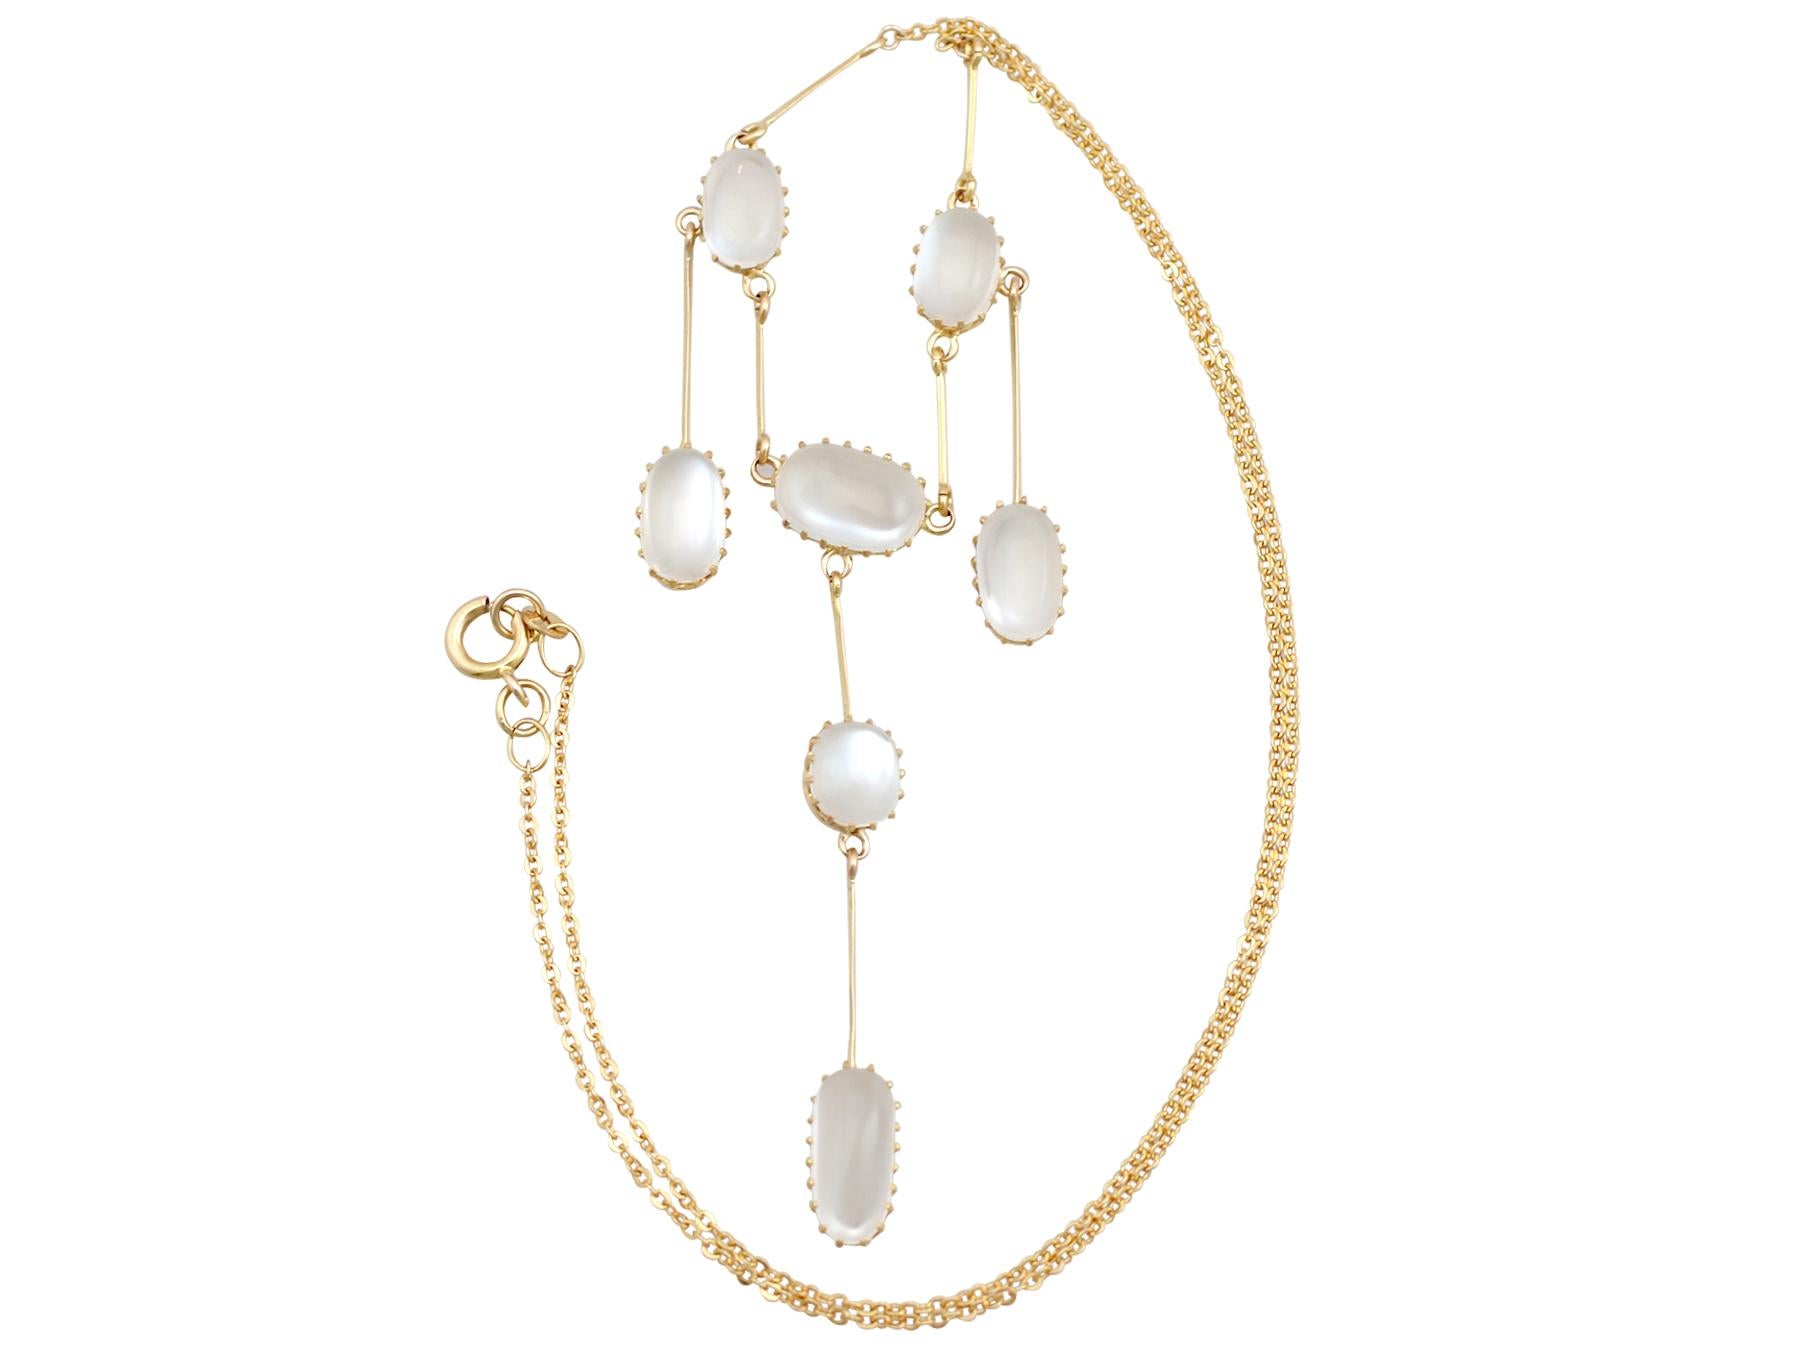 A stunning, fine and impressive antique 10.35 carat moonstone and 12 karat yellow gold pendant, 9 karat yellow gold necklace; part of our Victorian jewelry and estate jewelry collections.

This stunning, fine and impressive antique cabochon cut